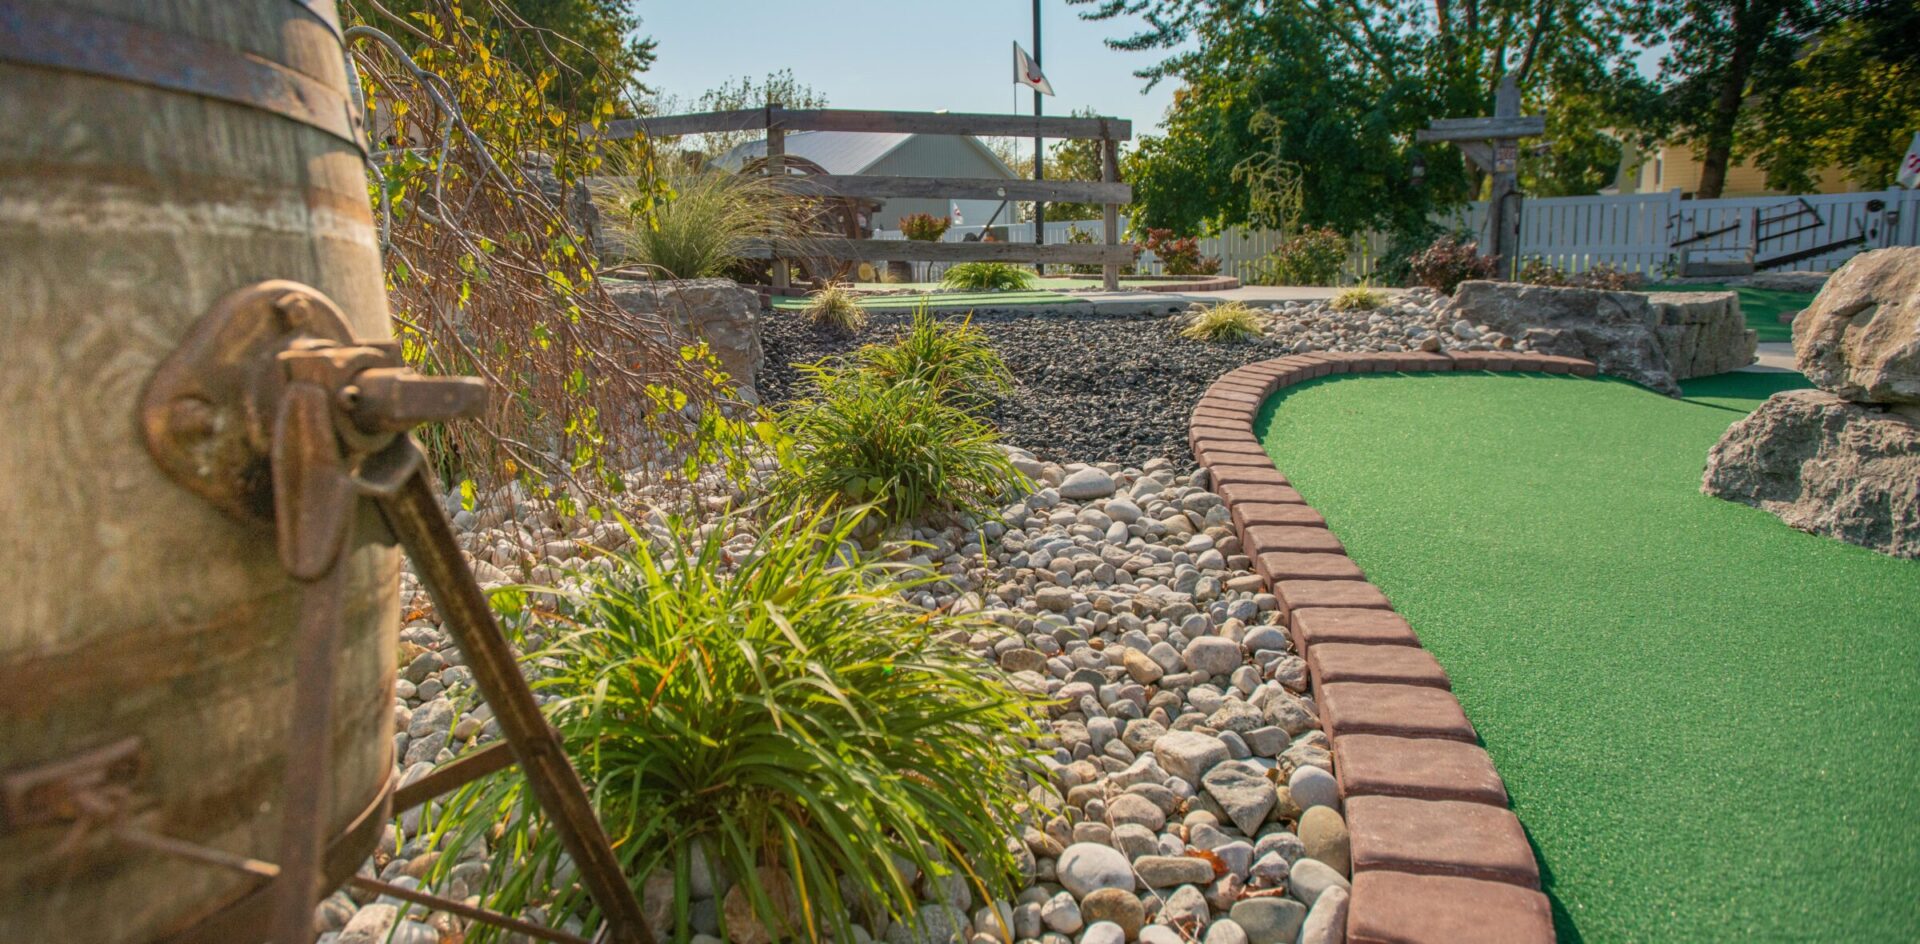 This image shows an outdoor mini-golf course with green artificial turf, edged by brick trim, surrounded by pebbles, rocks, and plants on a sunny day.